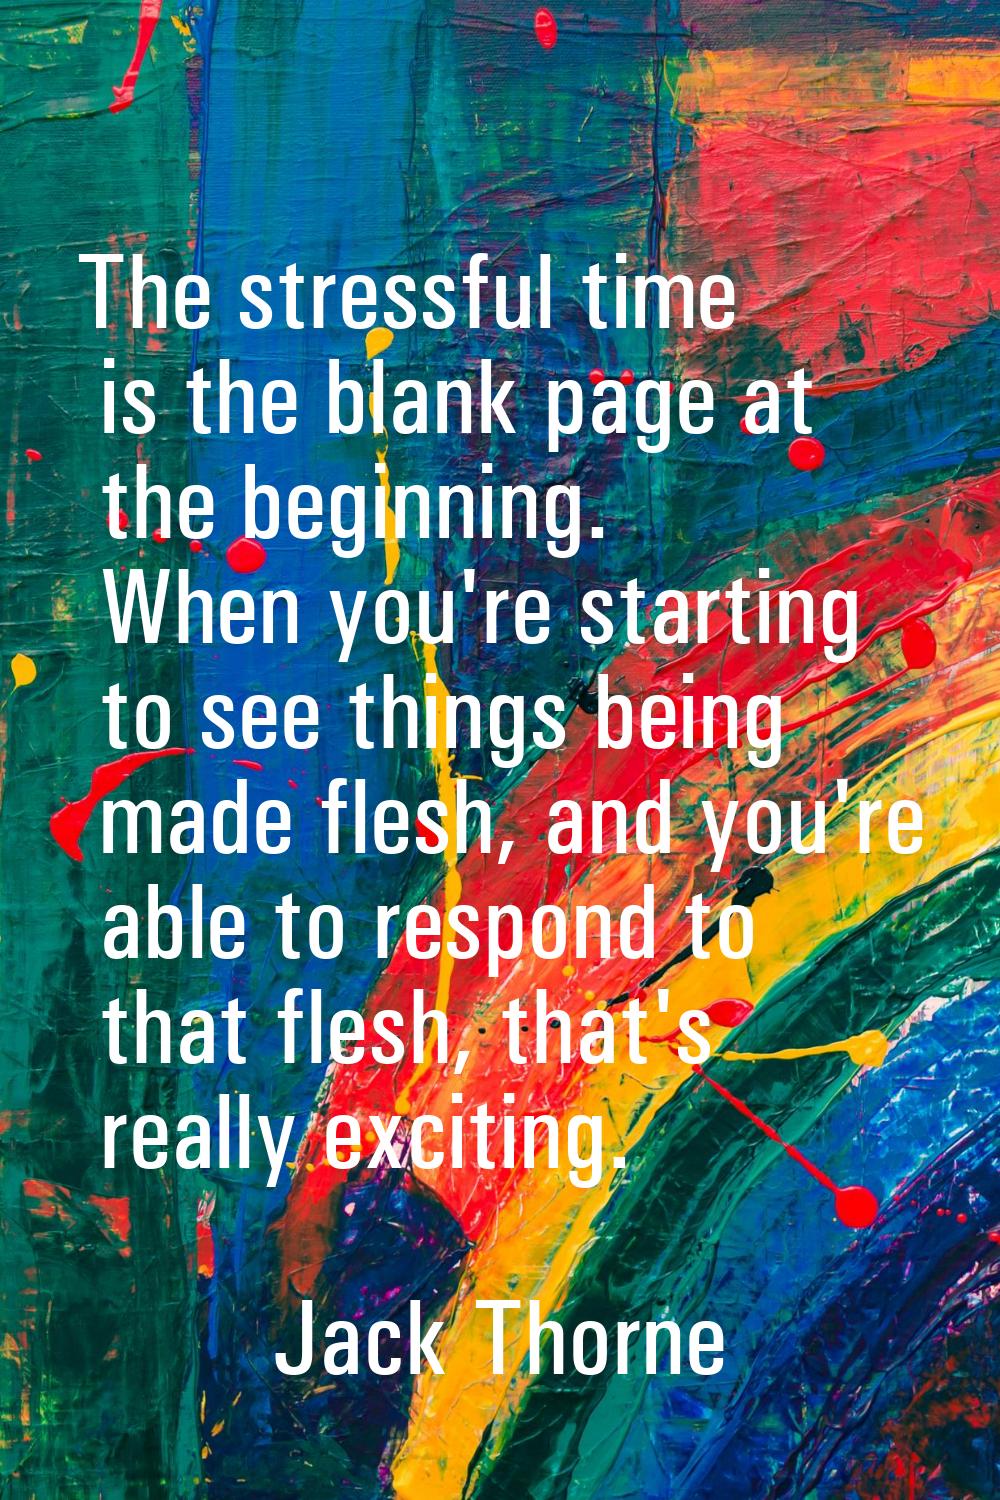 The stressful time is the blank page at the beginning. When you're starting to see things being mad